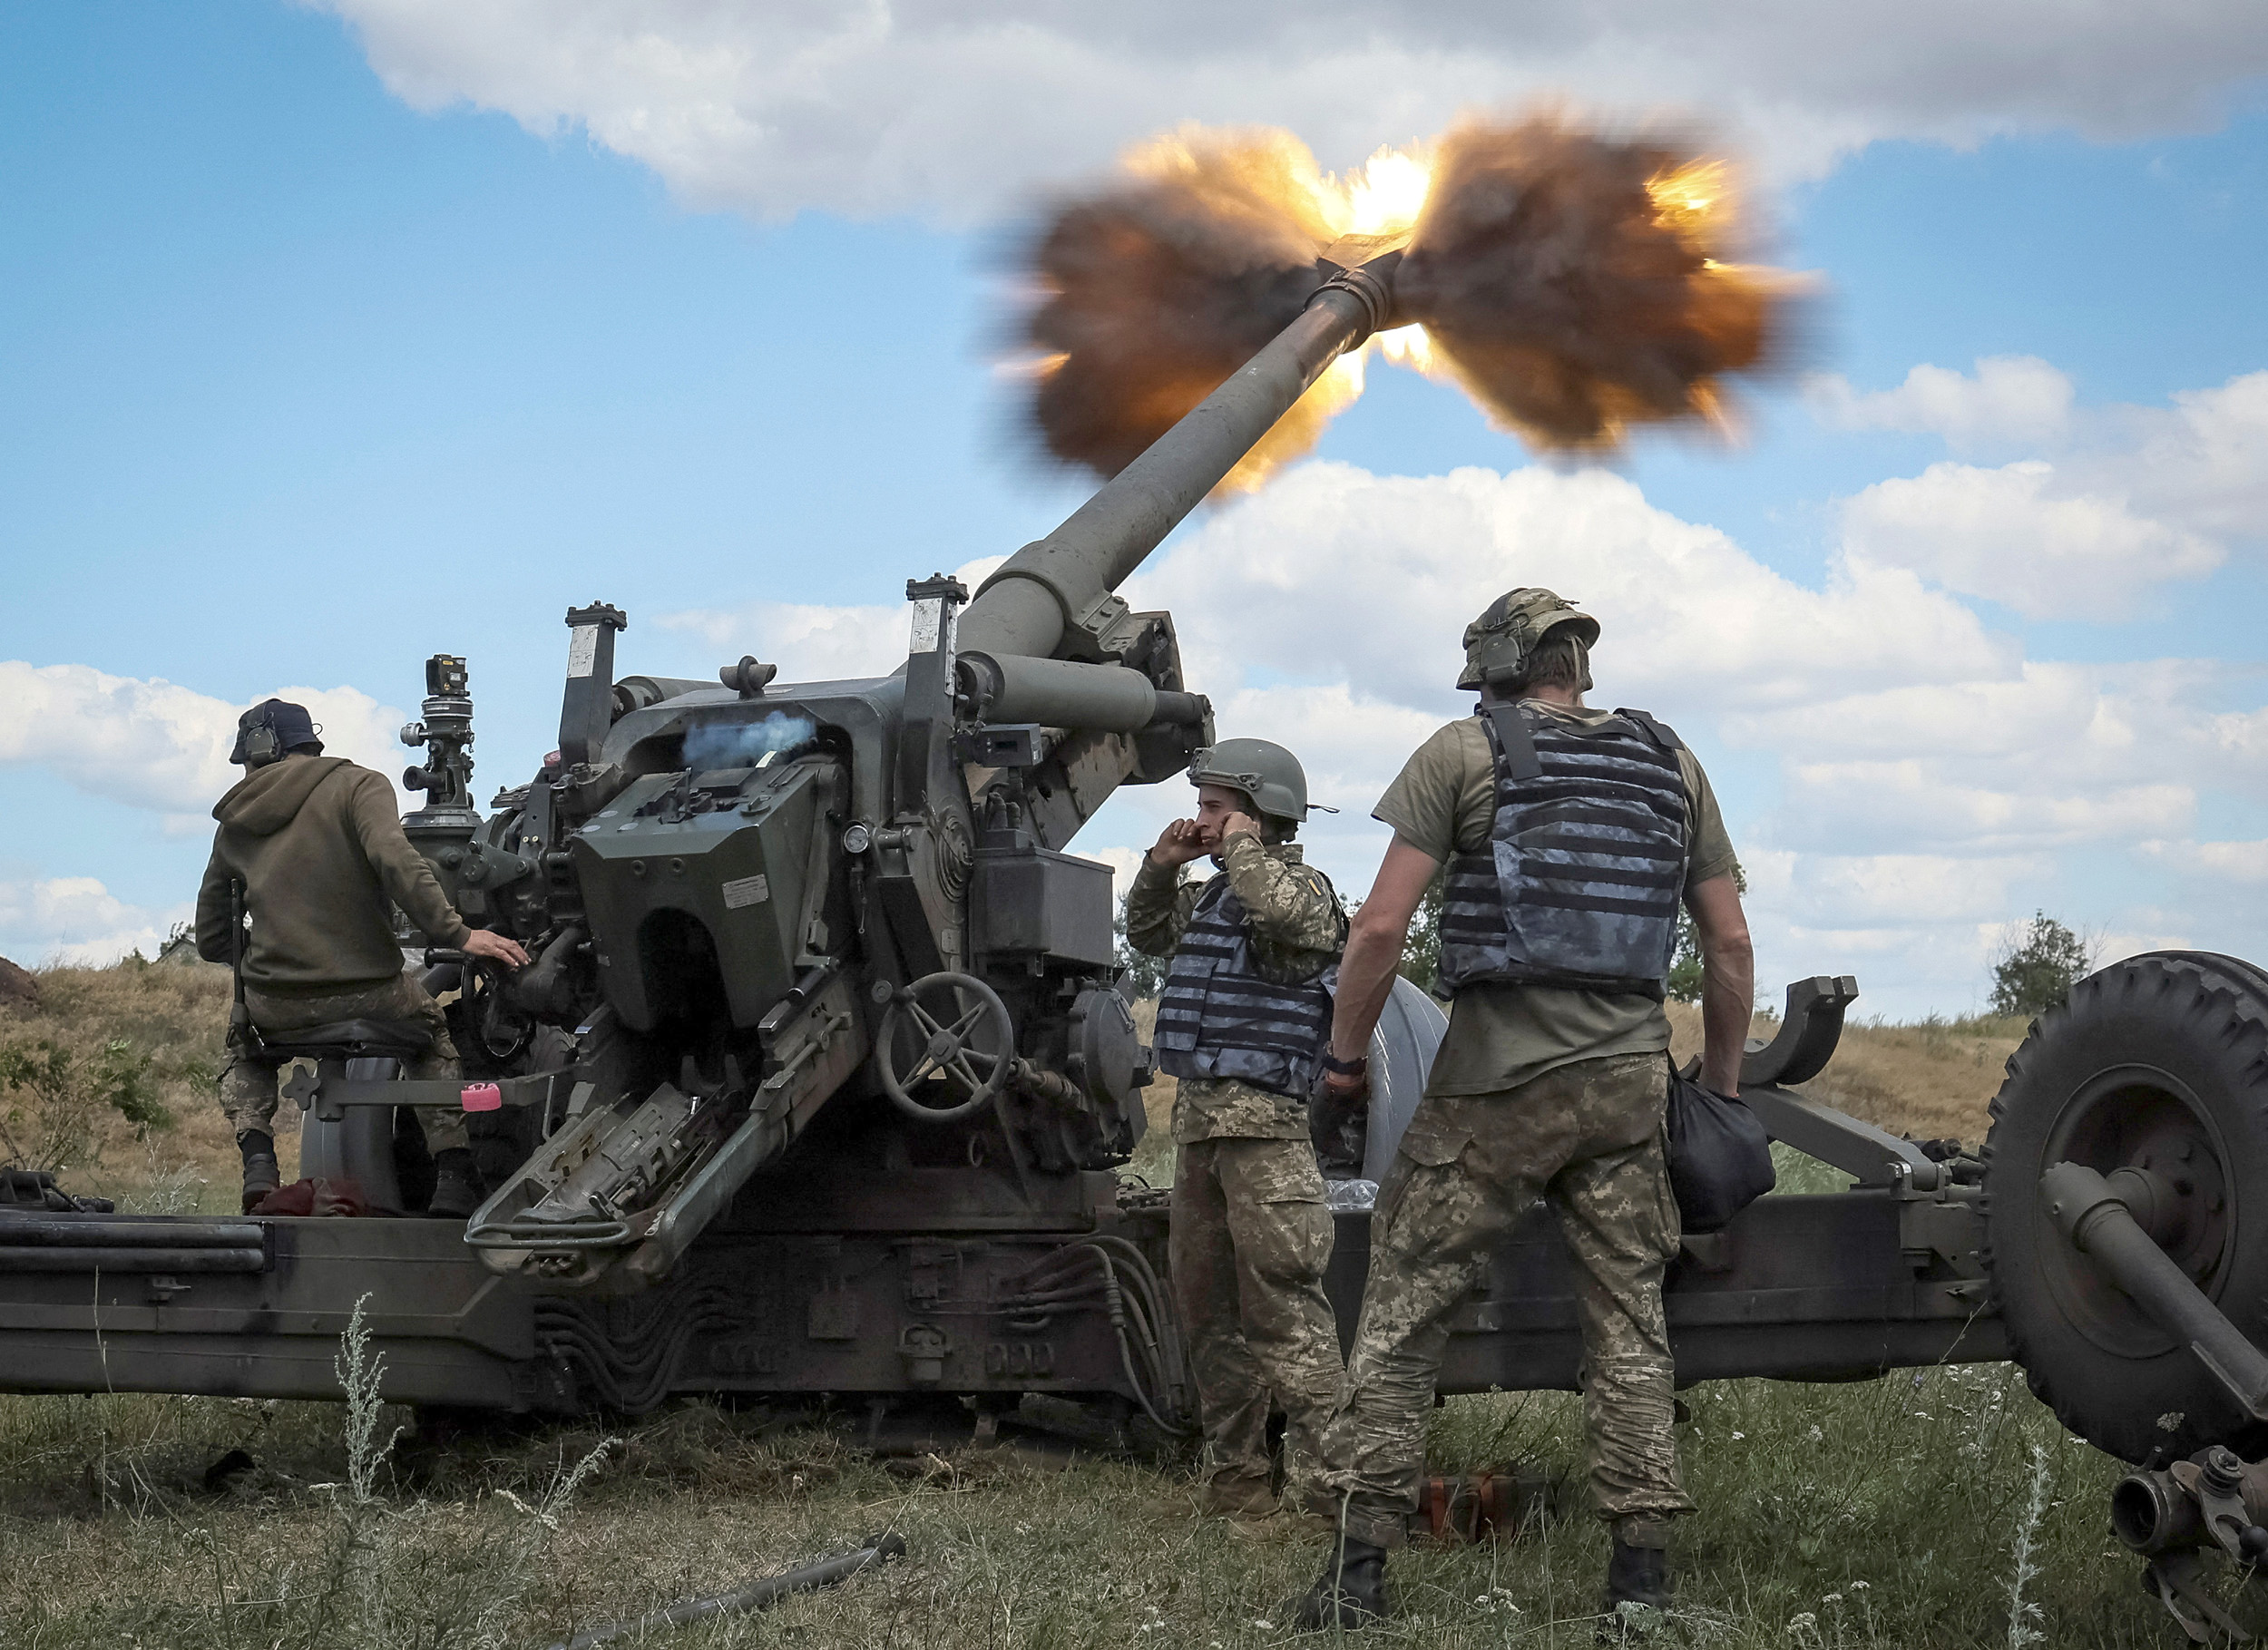 Ukrainian service members fire a shell from a towed howitzer FH-70 at a front line in the Donbas region, Ukraine, on July 18.